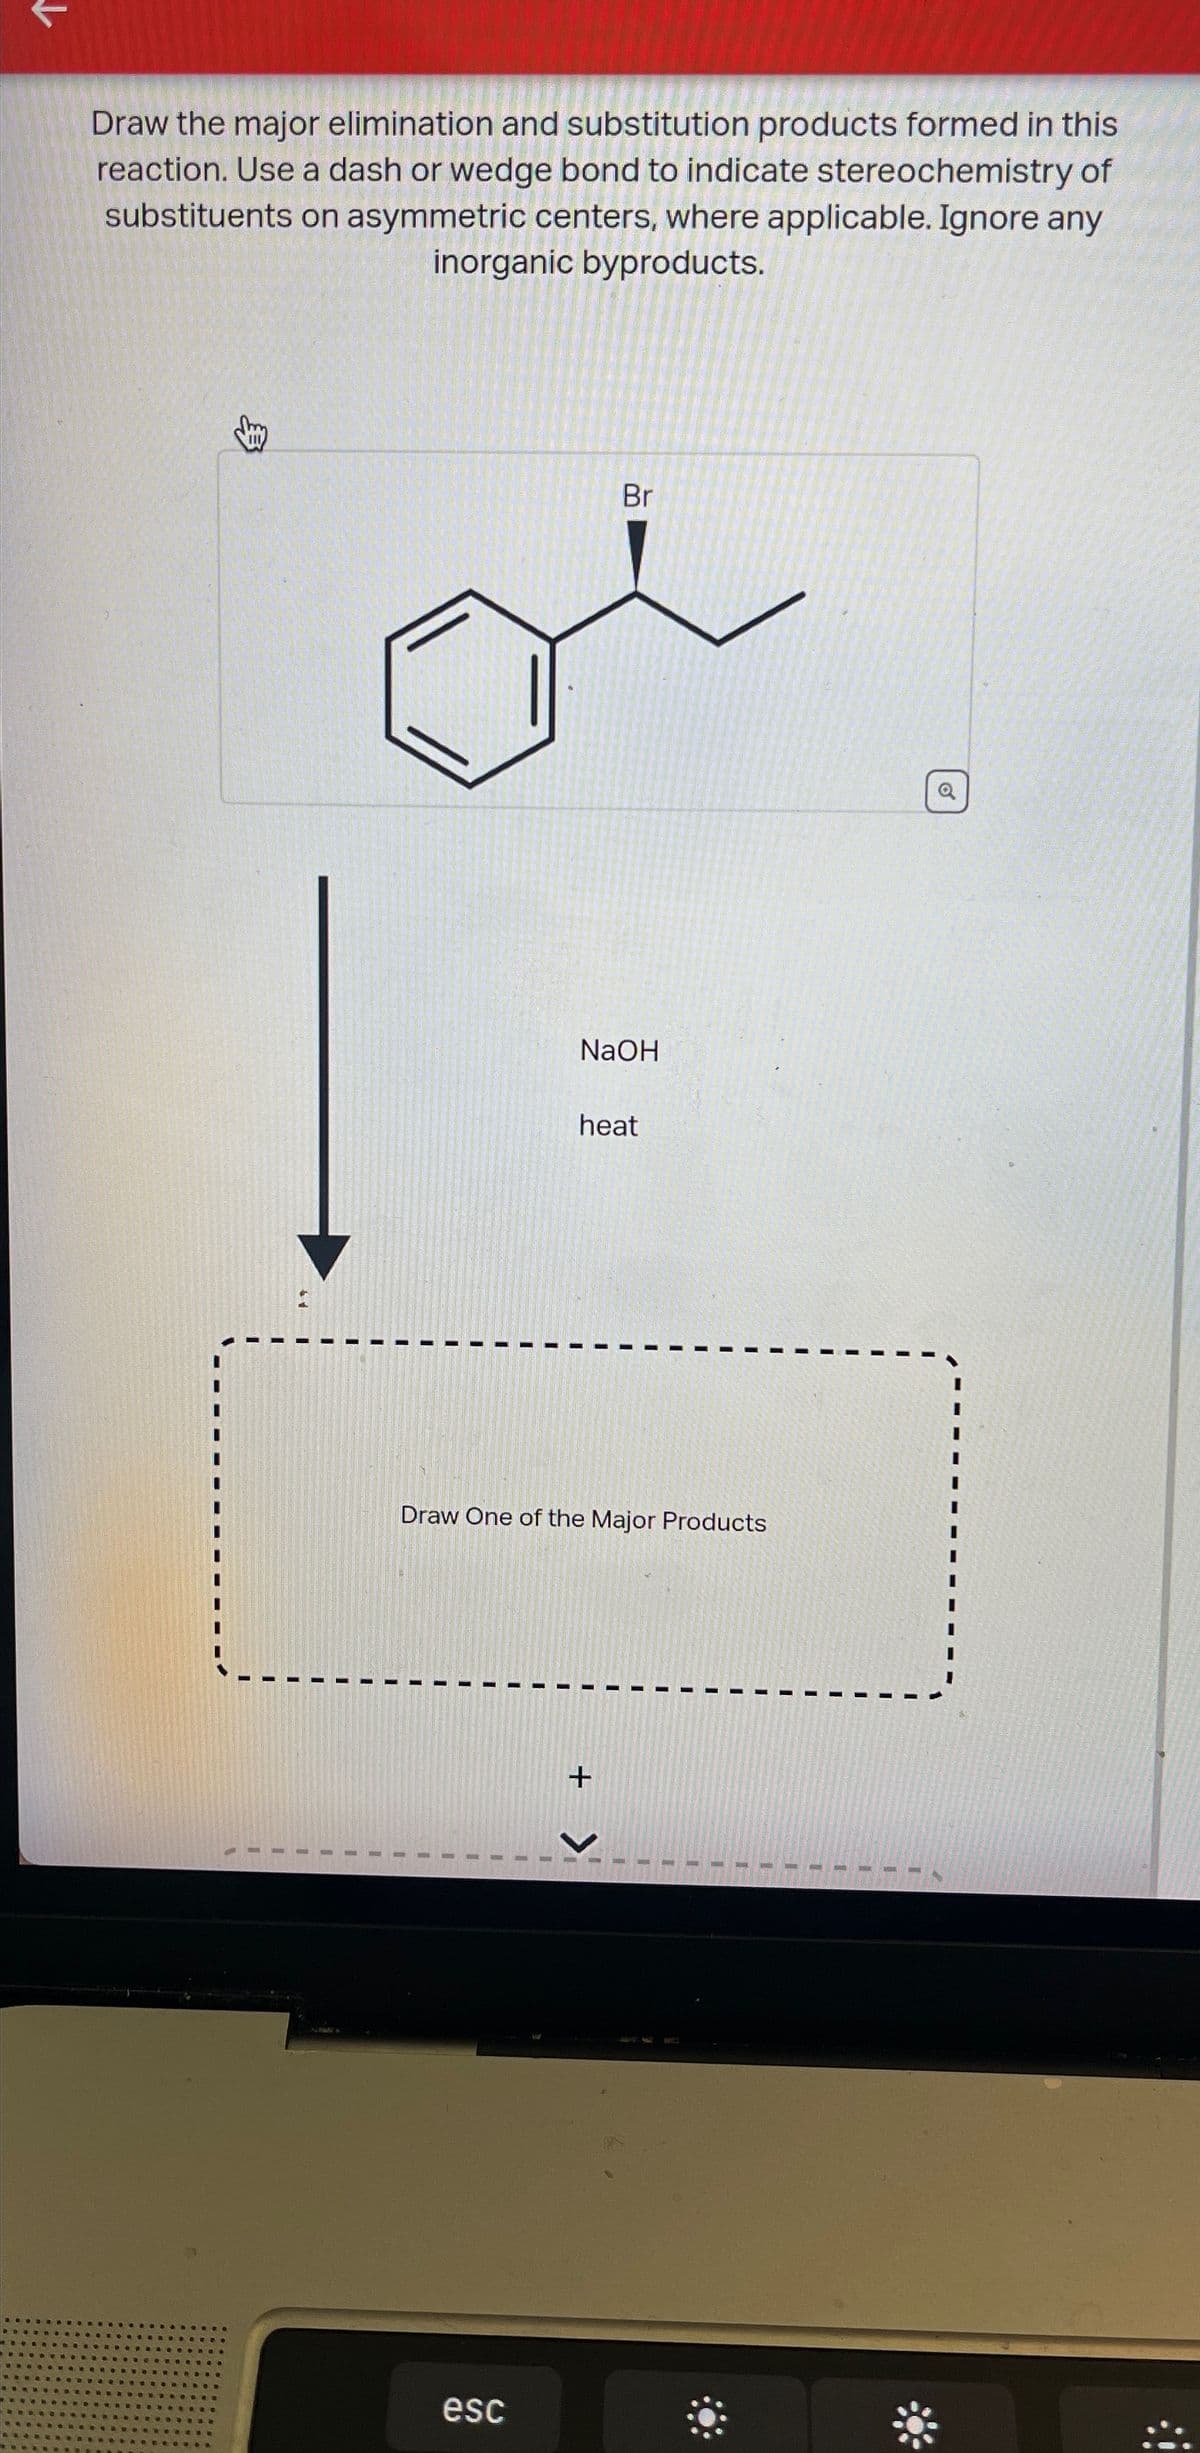 ↓
Draw the major elimination and substitution products formed in this
reaction. Use a dash or wedge bond to indicate stereochemistry of
substituents on asymmetric centers, where applicable. Ignore any
inorganic byproducts.
Br
NaOH
heat
Draw One of the Major Products
I
+
>
esc